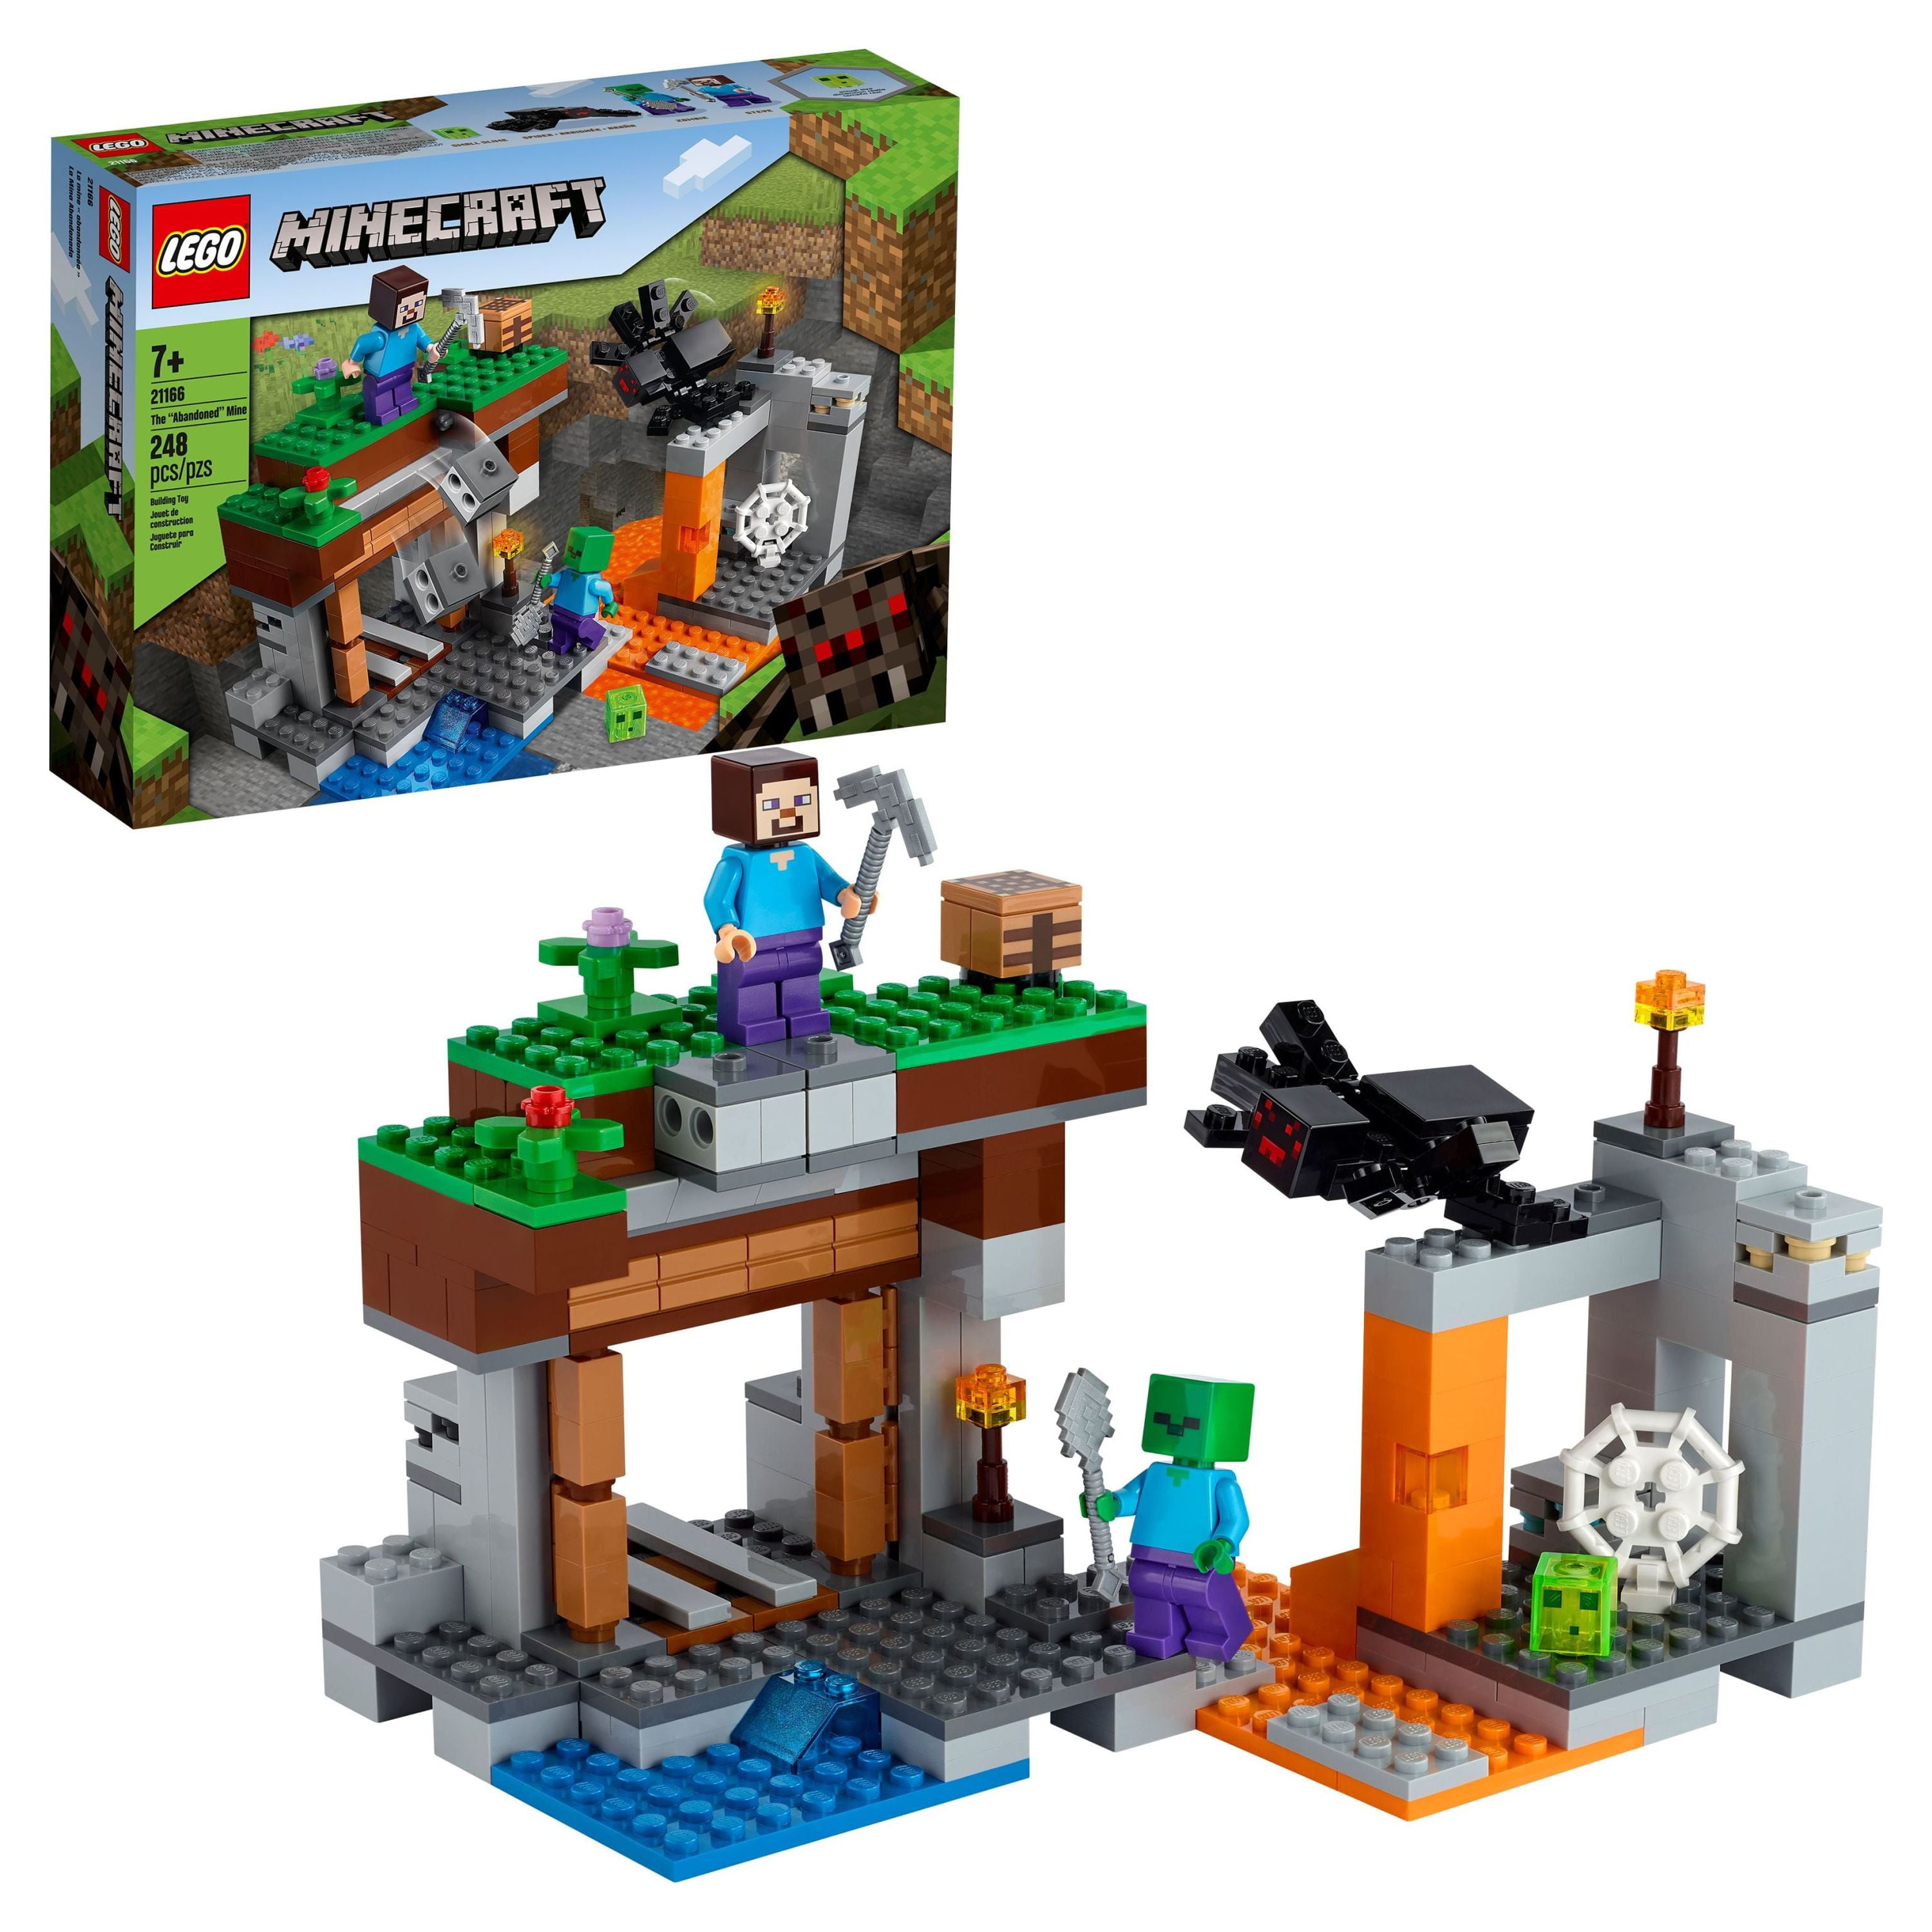 LEGO Minecraft The Training Grounds Toy Building Set 21183 Minecraft Toy  for Kids, Boys and Girls Age 8+ Years Old, Building Kit with House, Cave